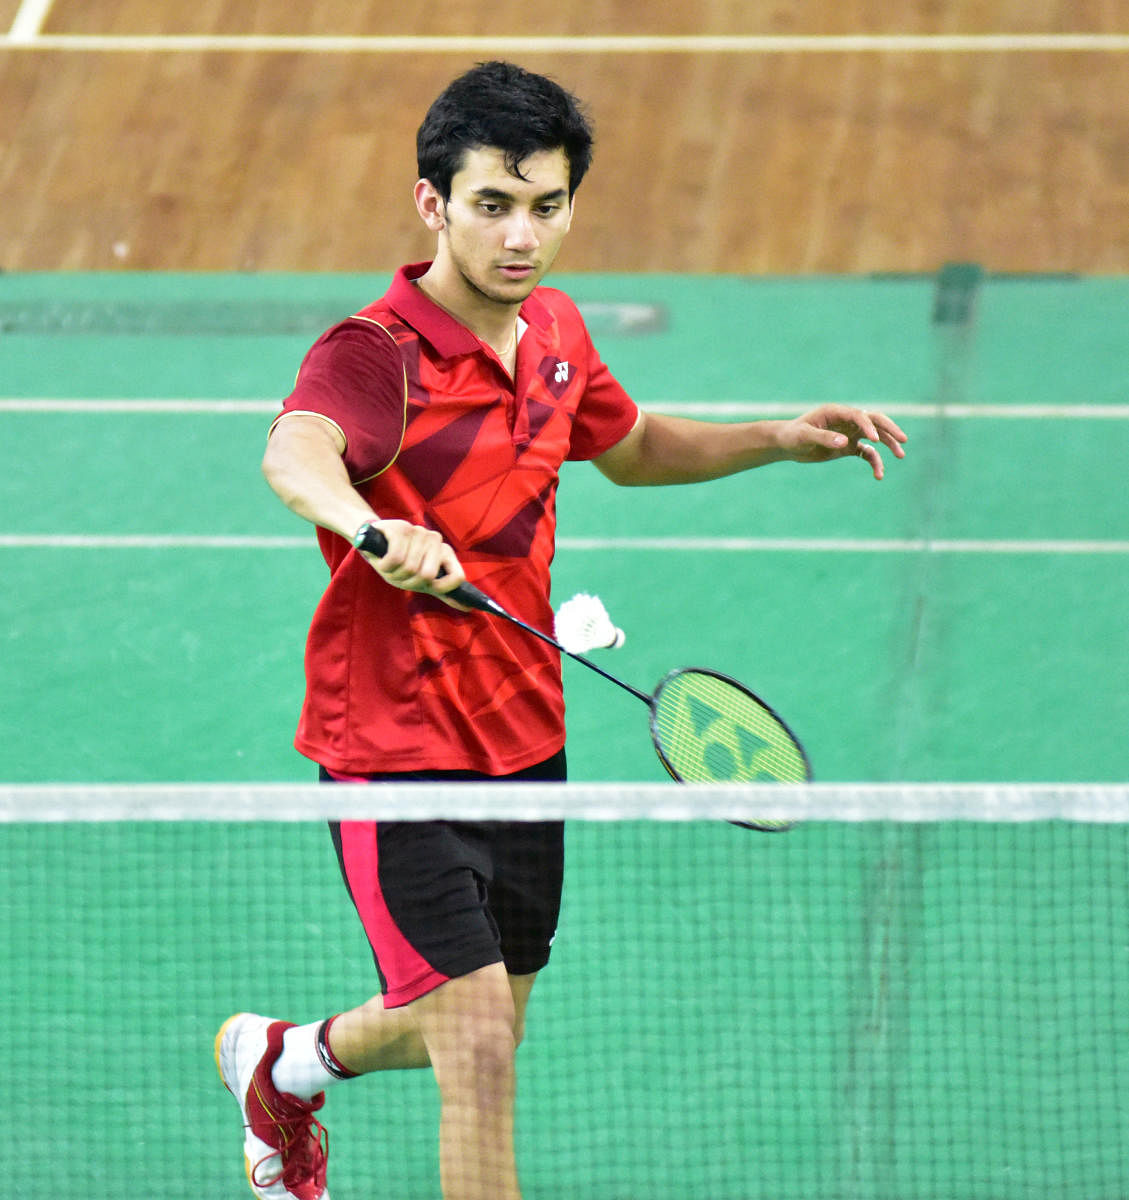 Lakshya clinches Asia Junior Championship title